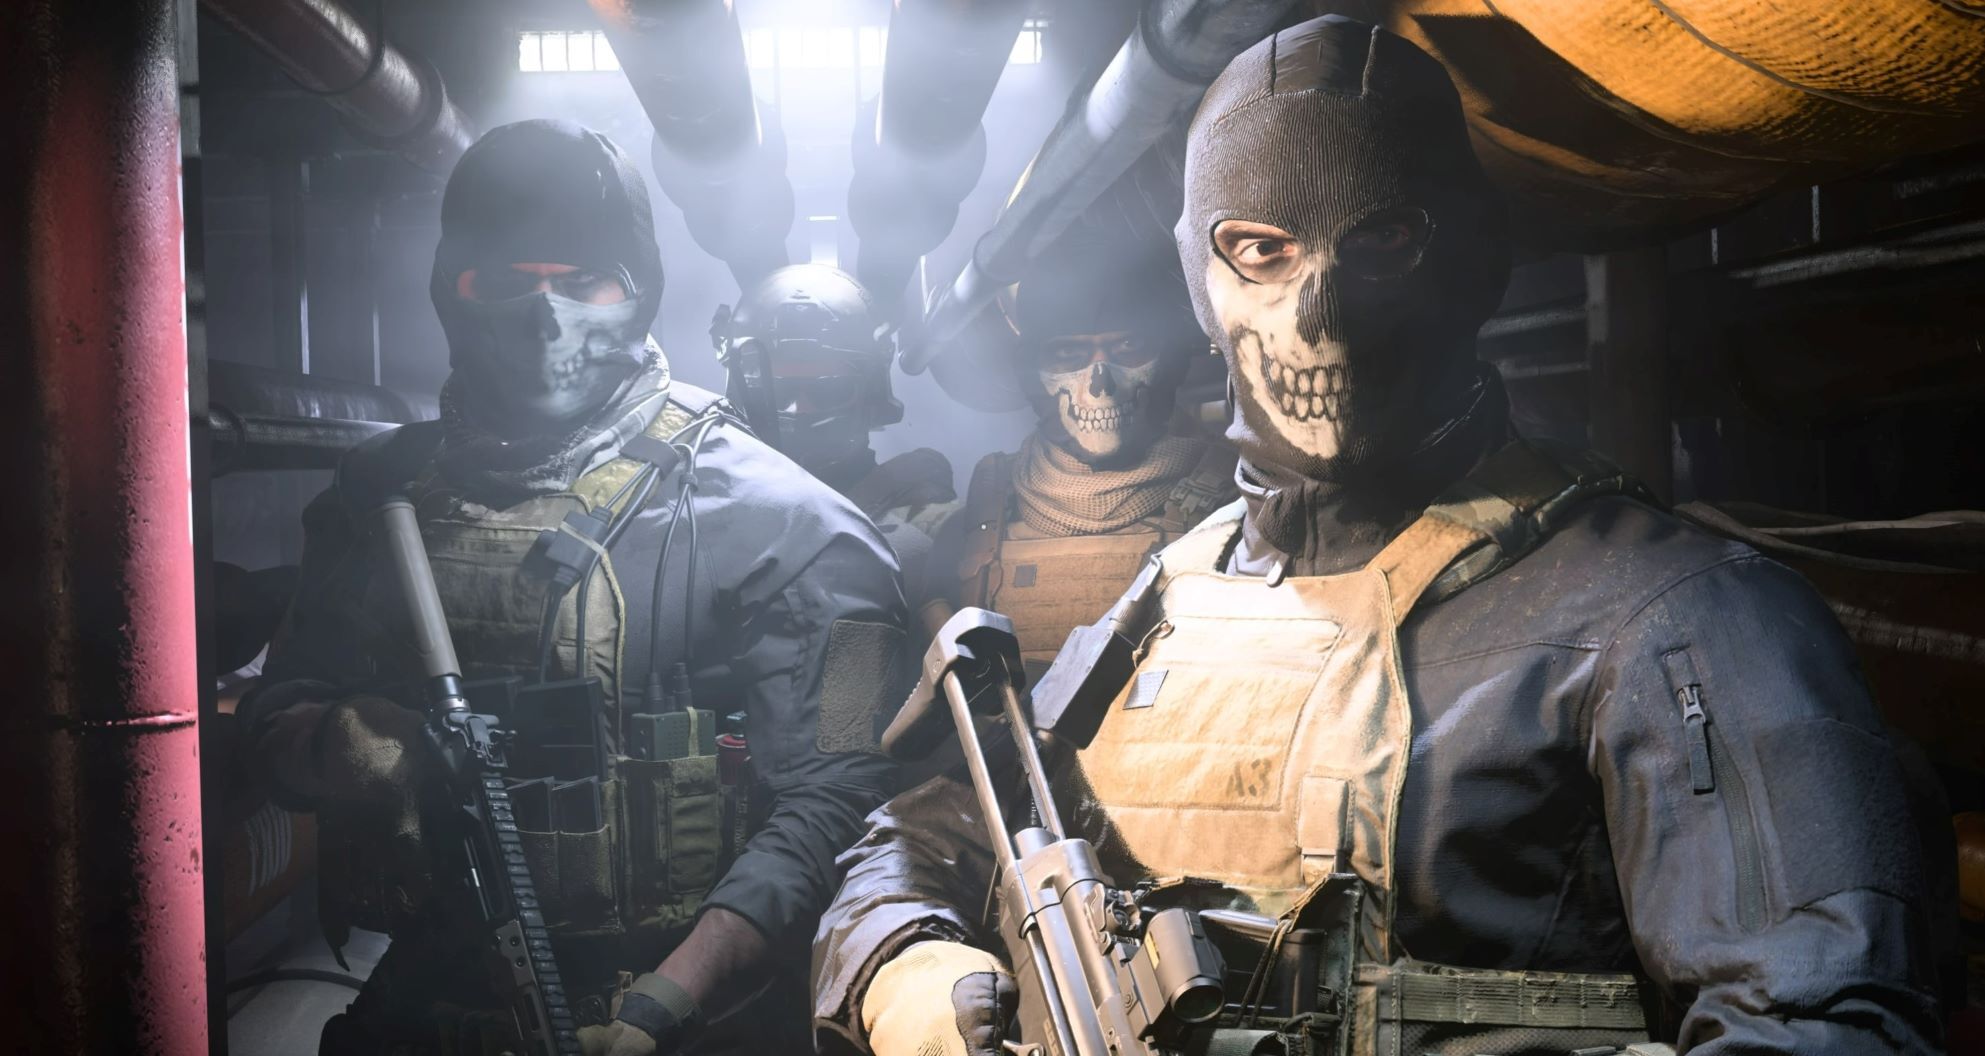 CoD insider claims MW2 devs interested in Ghost spinoff campaign - Dexerto